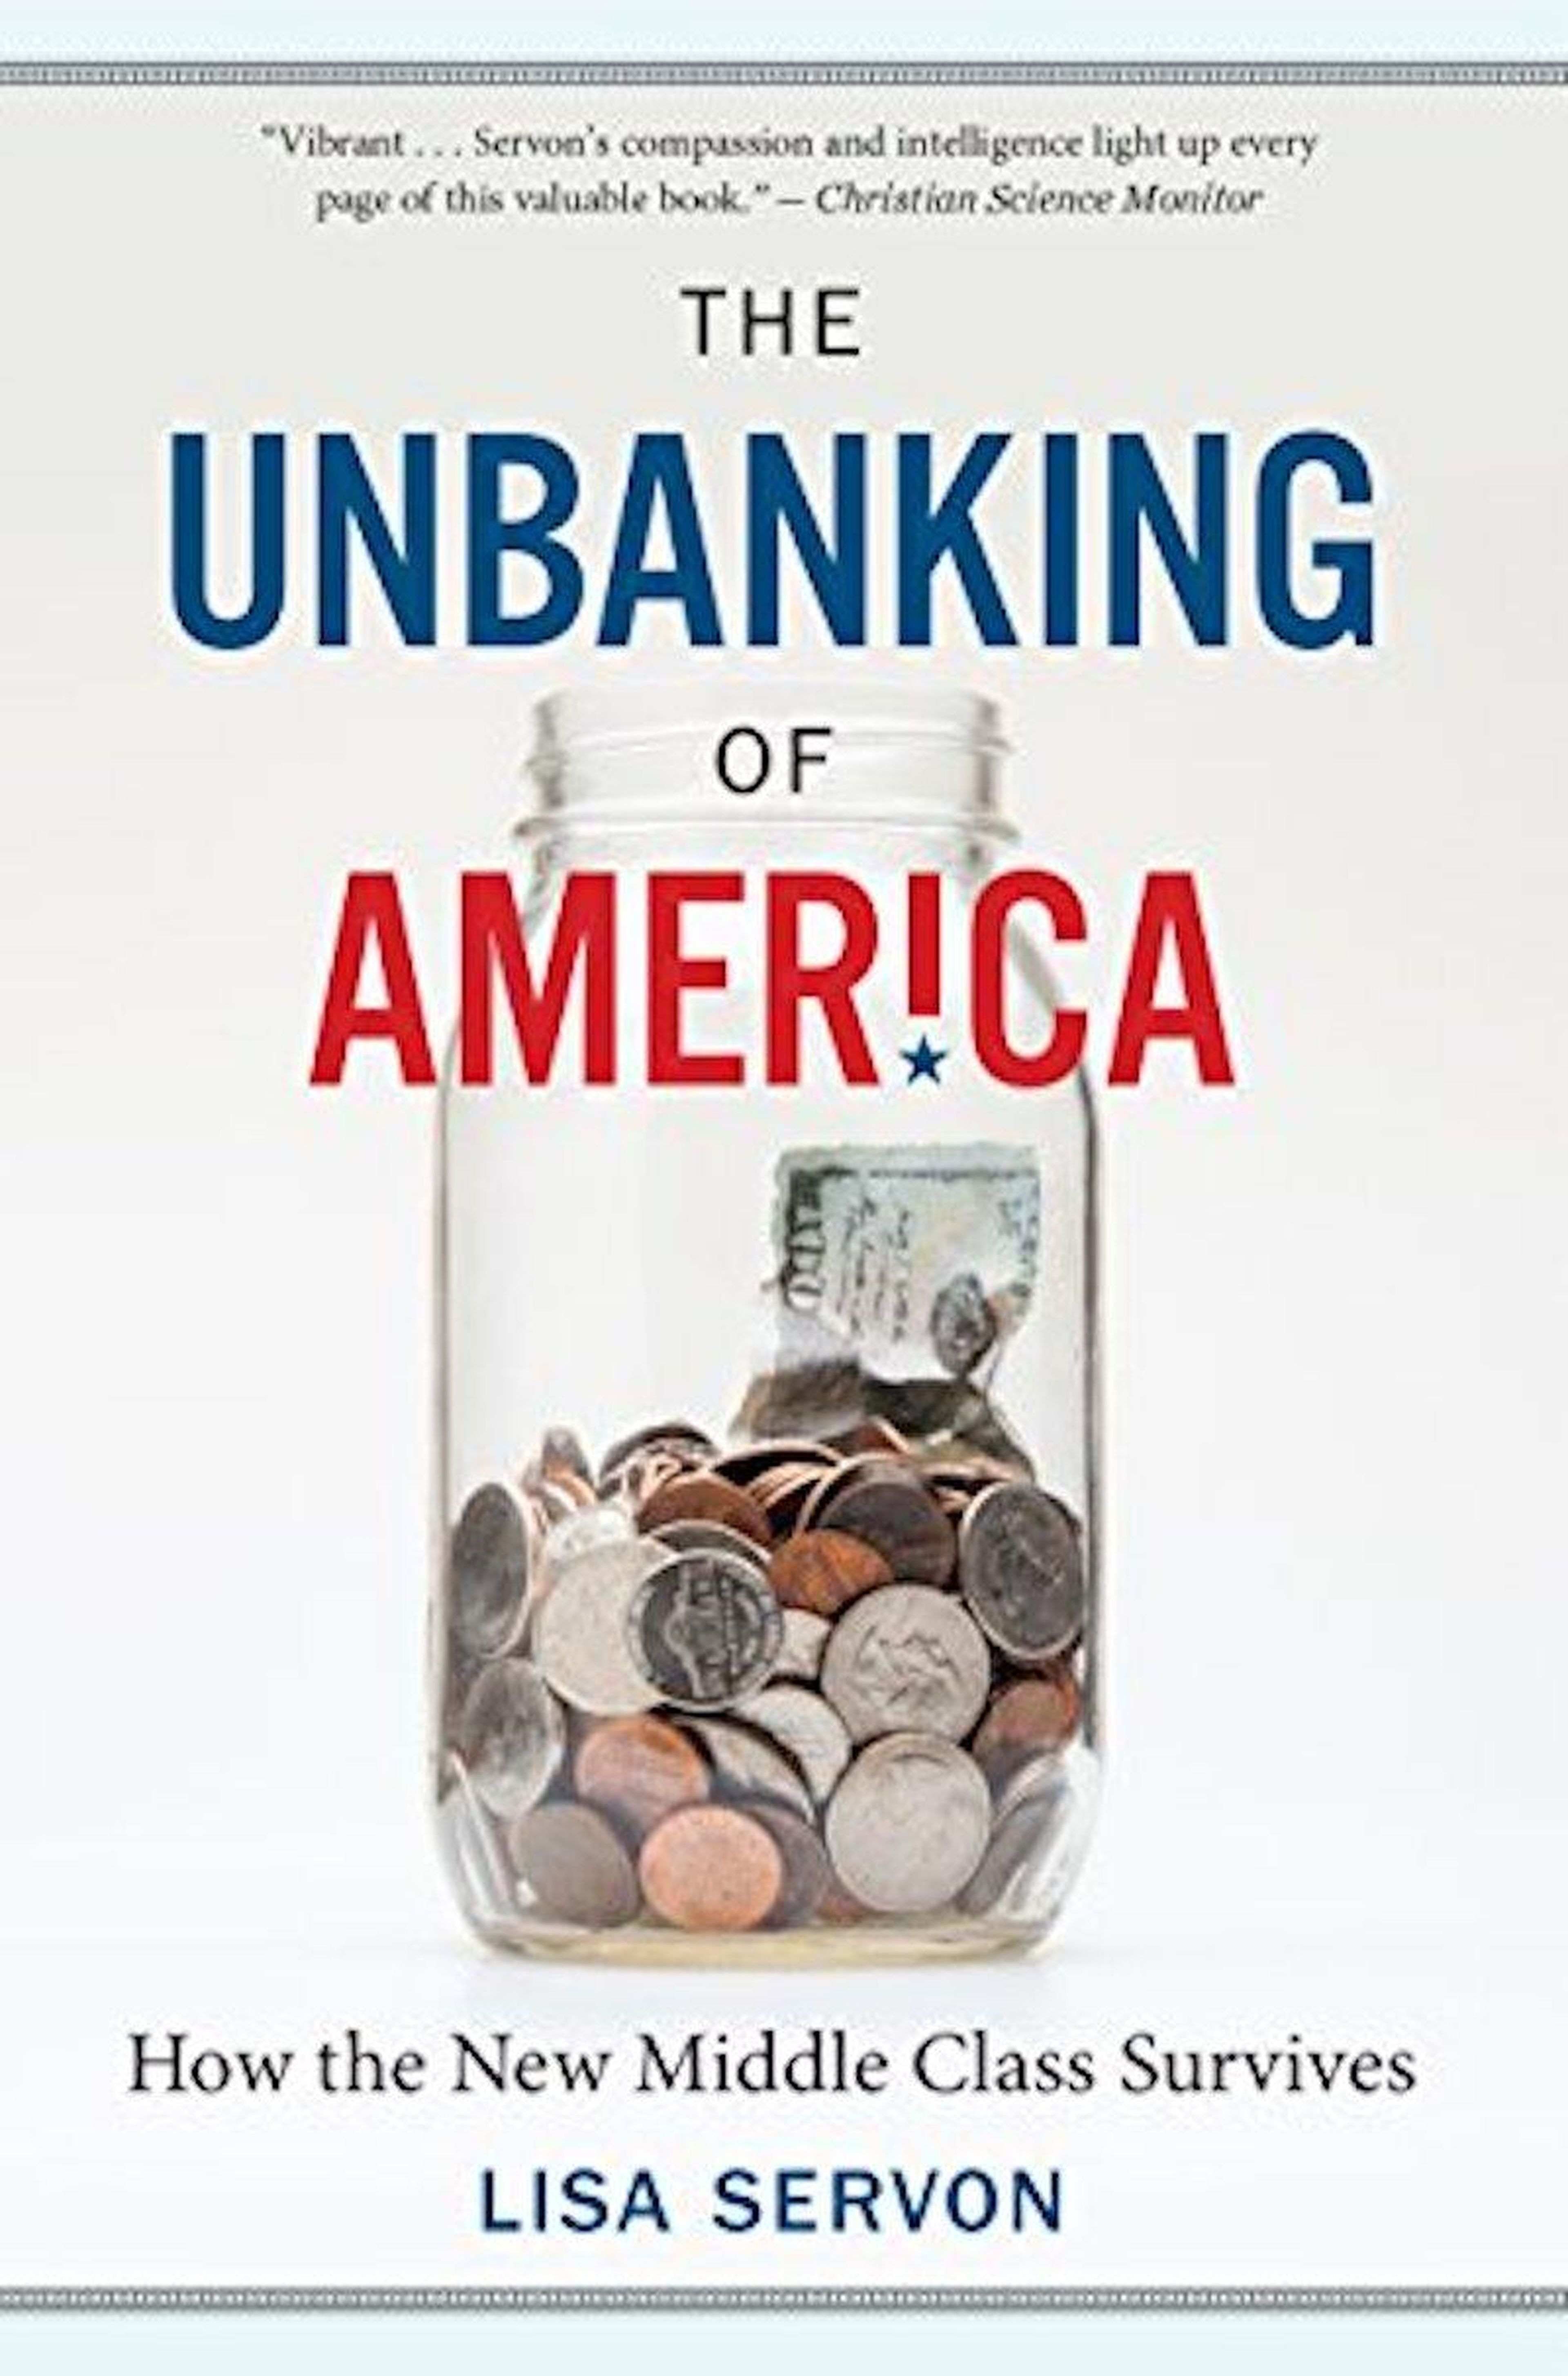 "The Unbanking of America: How the New Middle Class Survives" by Lisa Servon